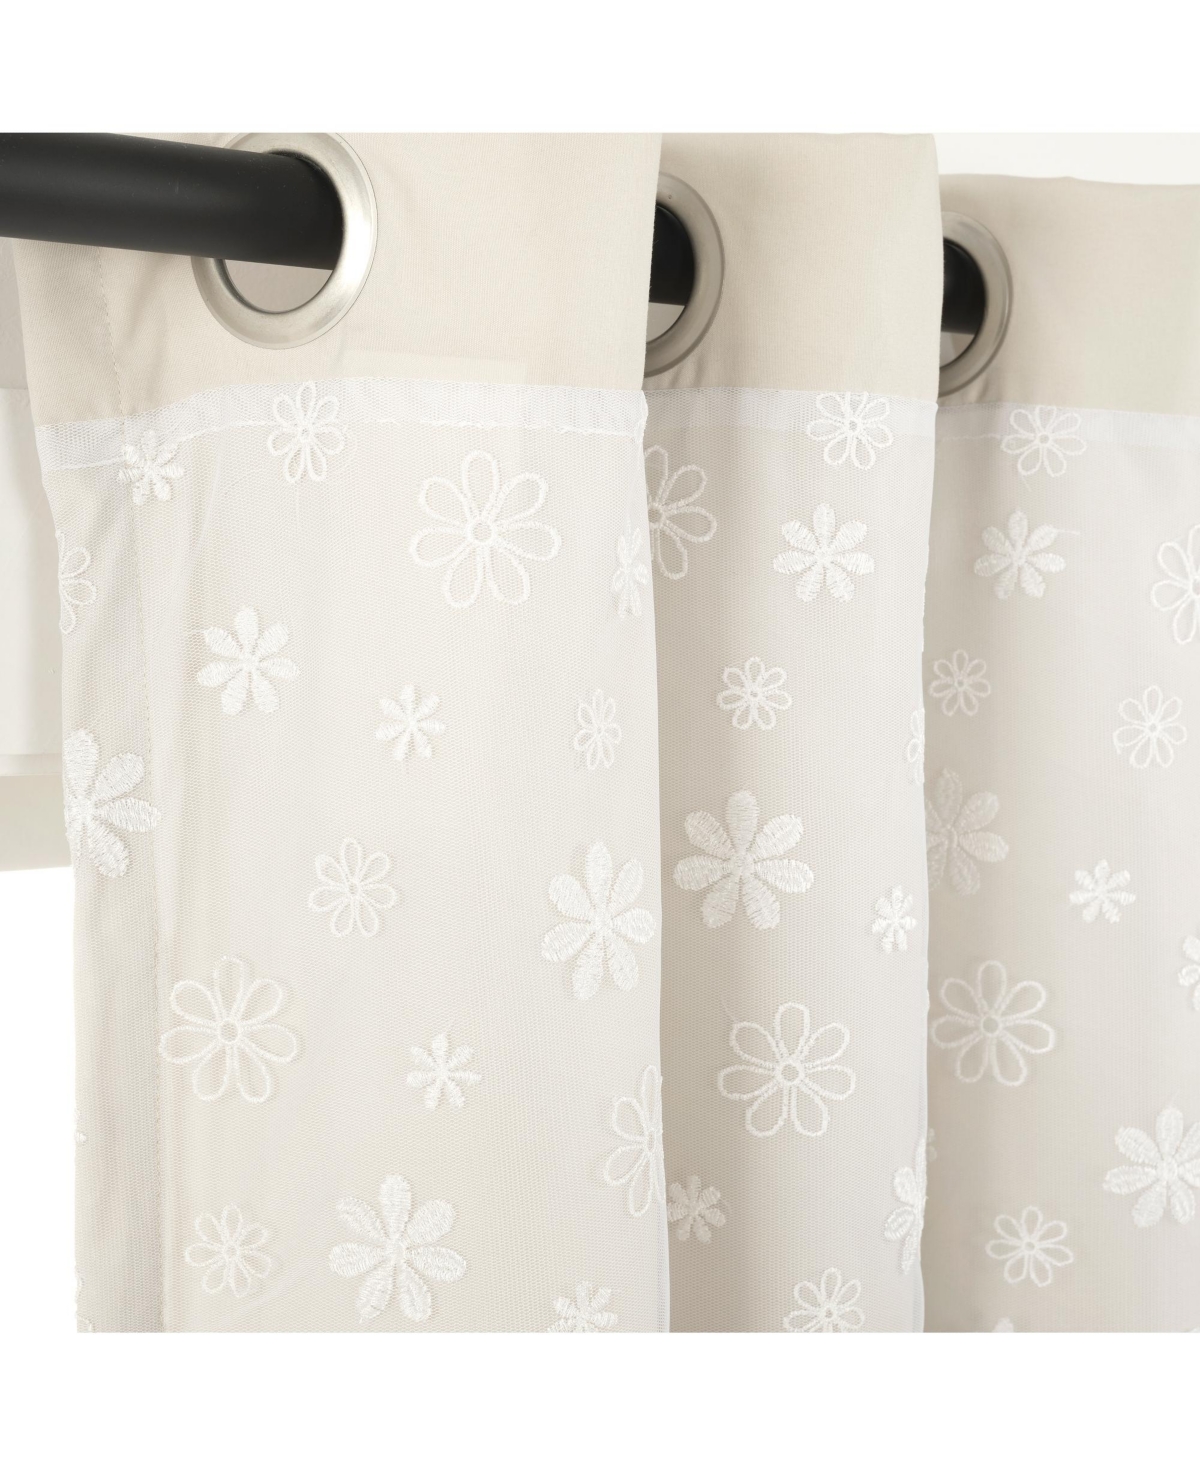 Dylin Flower Embroidery Window Curtain Panel - Light gray